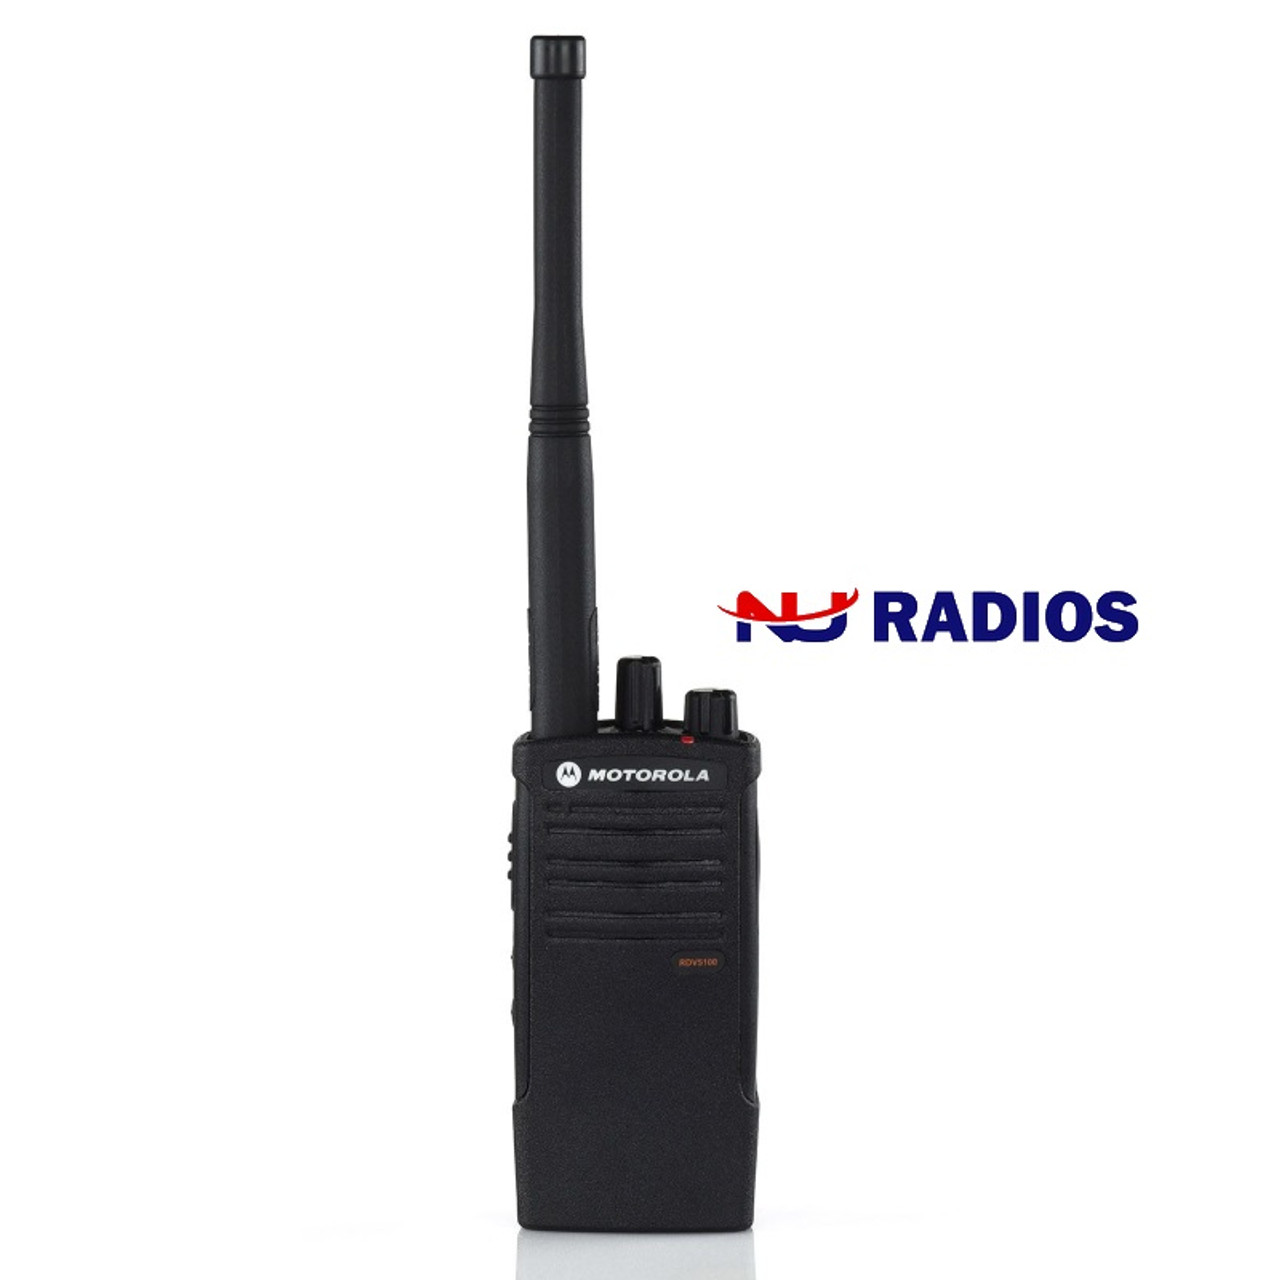 Motorola RDV5100 Watt Business 2-Way VHF Radio is just what you need.  This radios is a workhorse and gets the job done. Perfect for construction  sites, farms, large open areas and